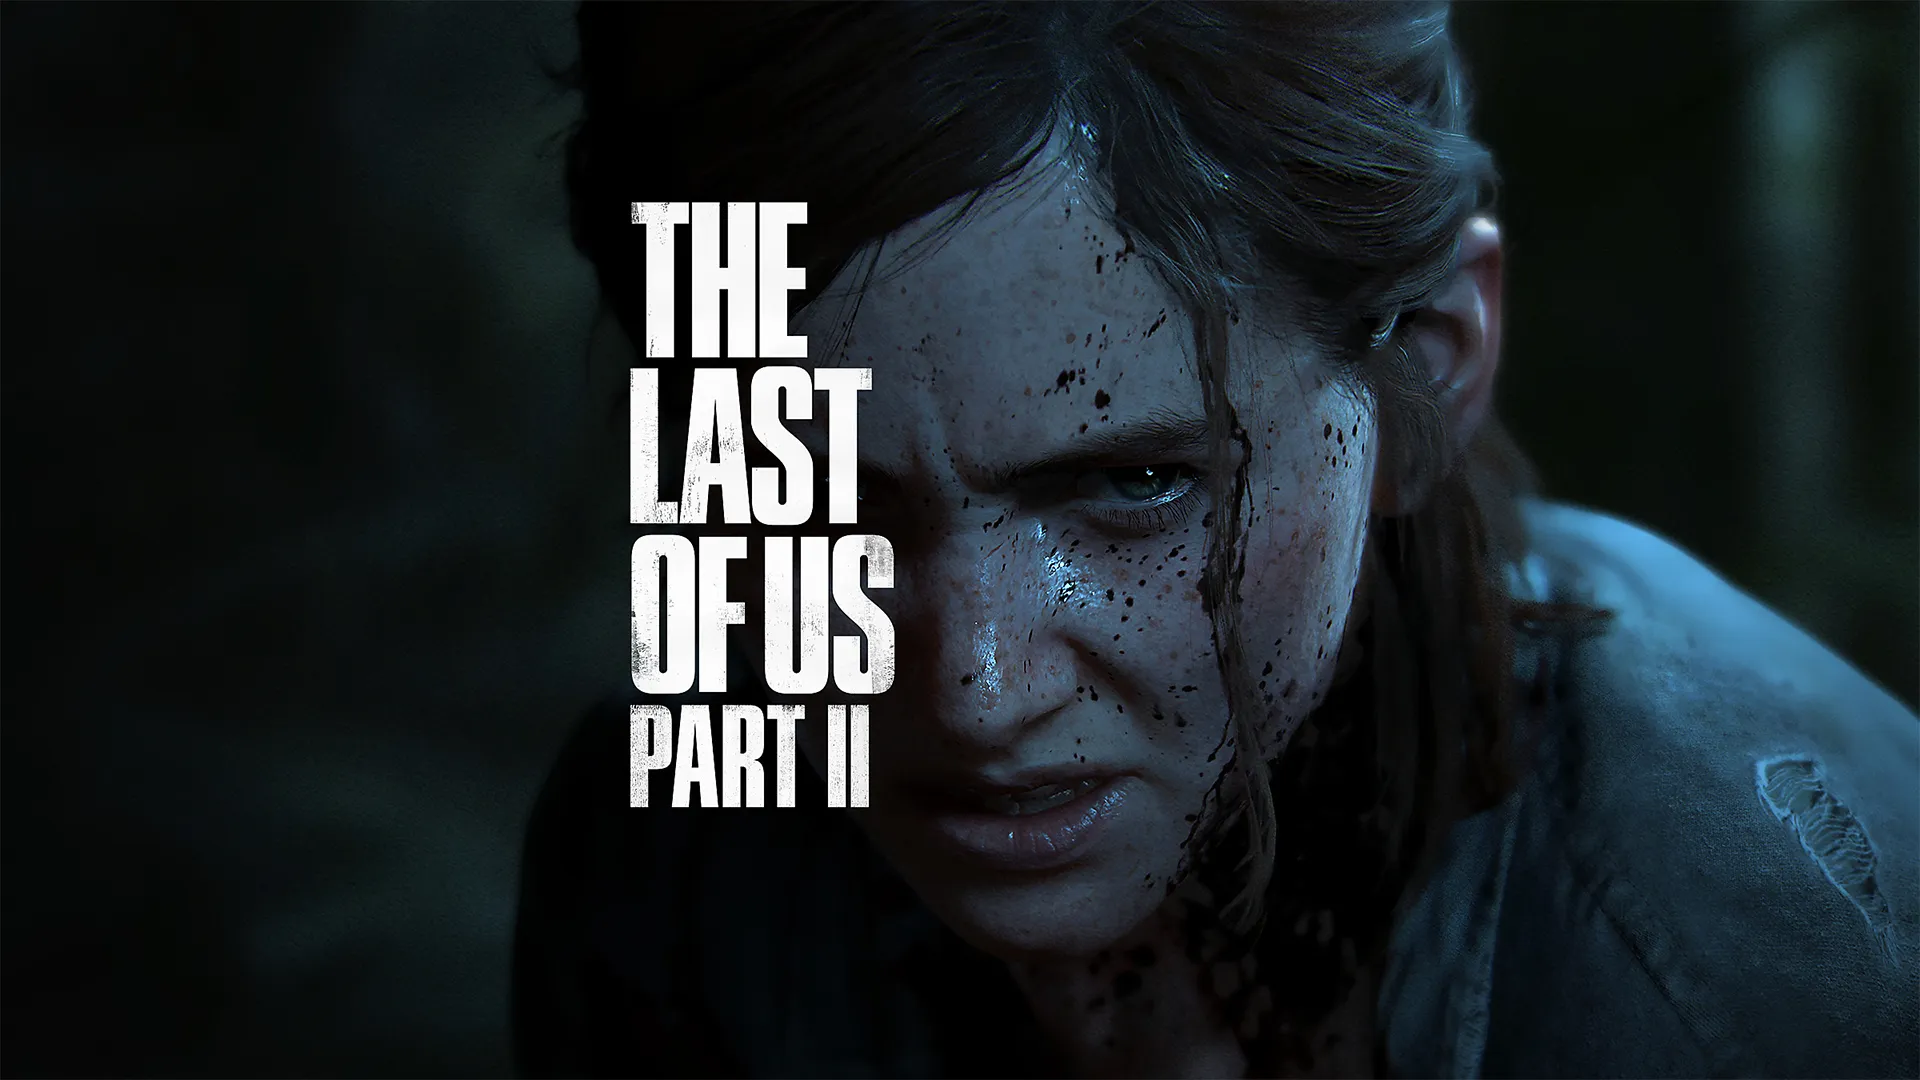 https://caniplaythat.com/2020/06/18/the-last-of-us-2-review-blind-accessibility/